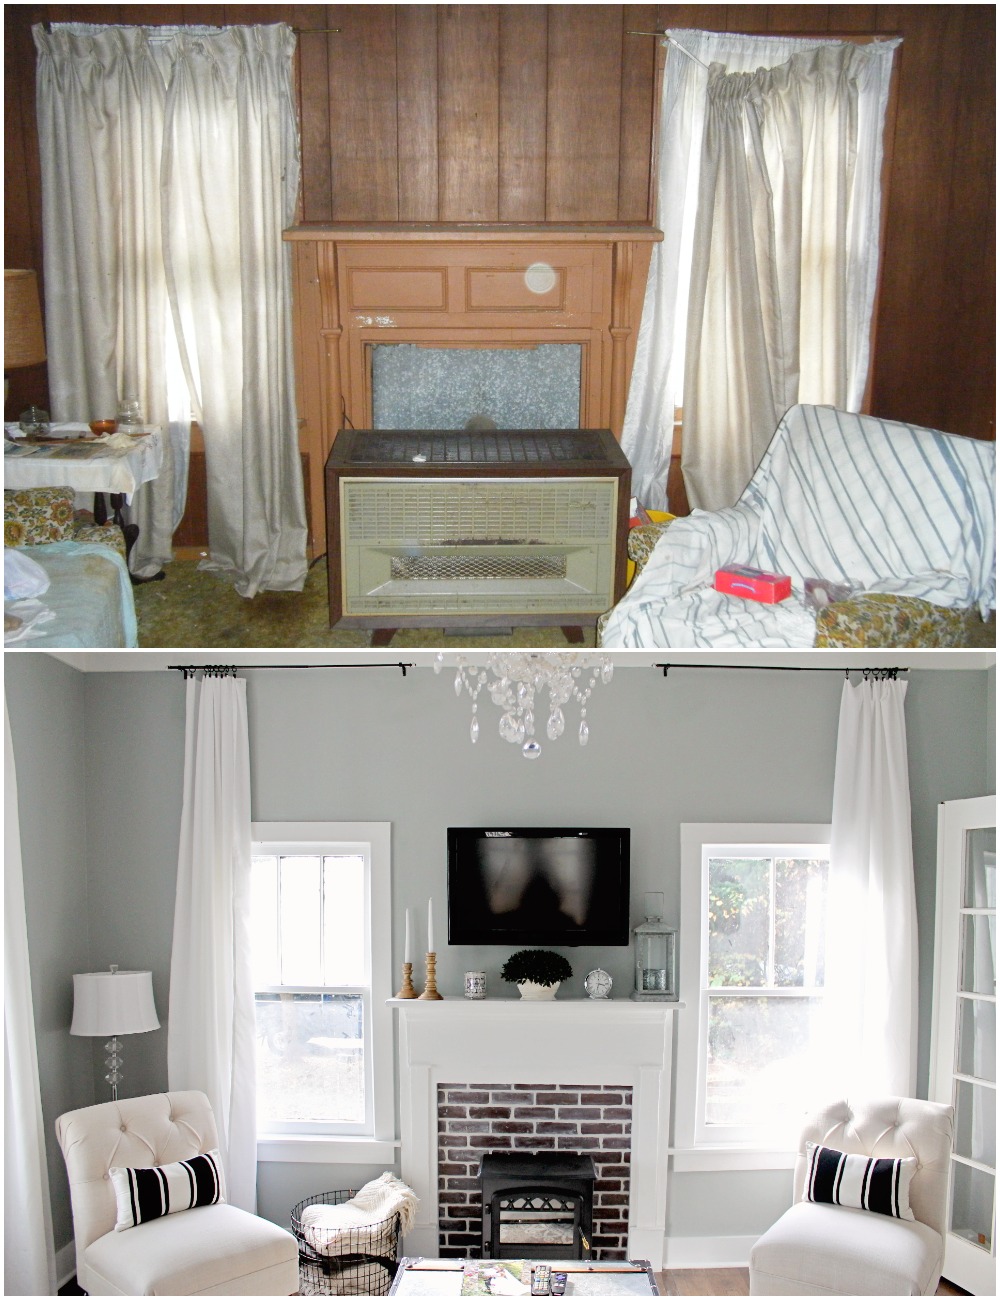 Elizabeth Burns Design  Budget-Friendly Fixer Upper Farmhouse Before and After House Flip - DIY Living Room with Faux Fireplace and French Doors - Sherwin Williams Magnetic Gray (5).jpg